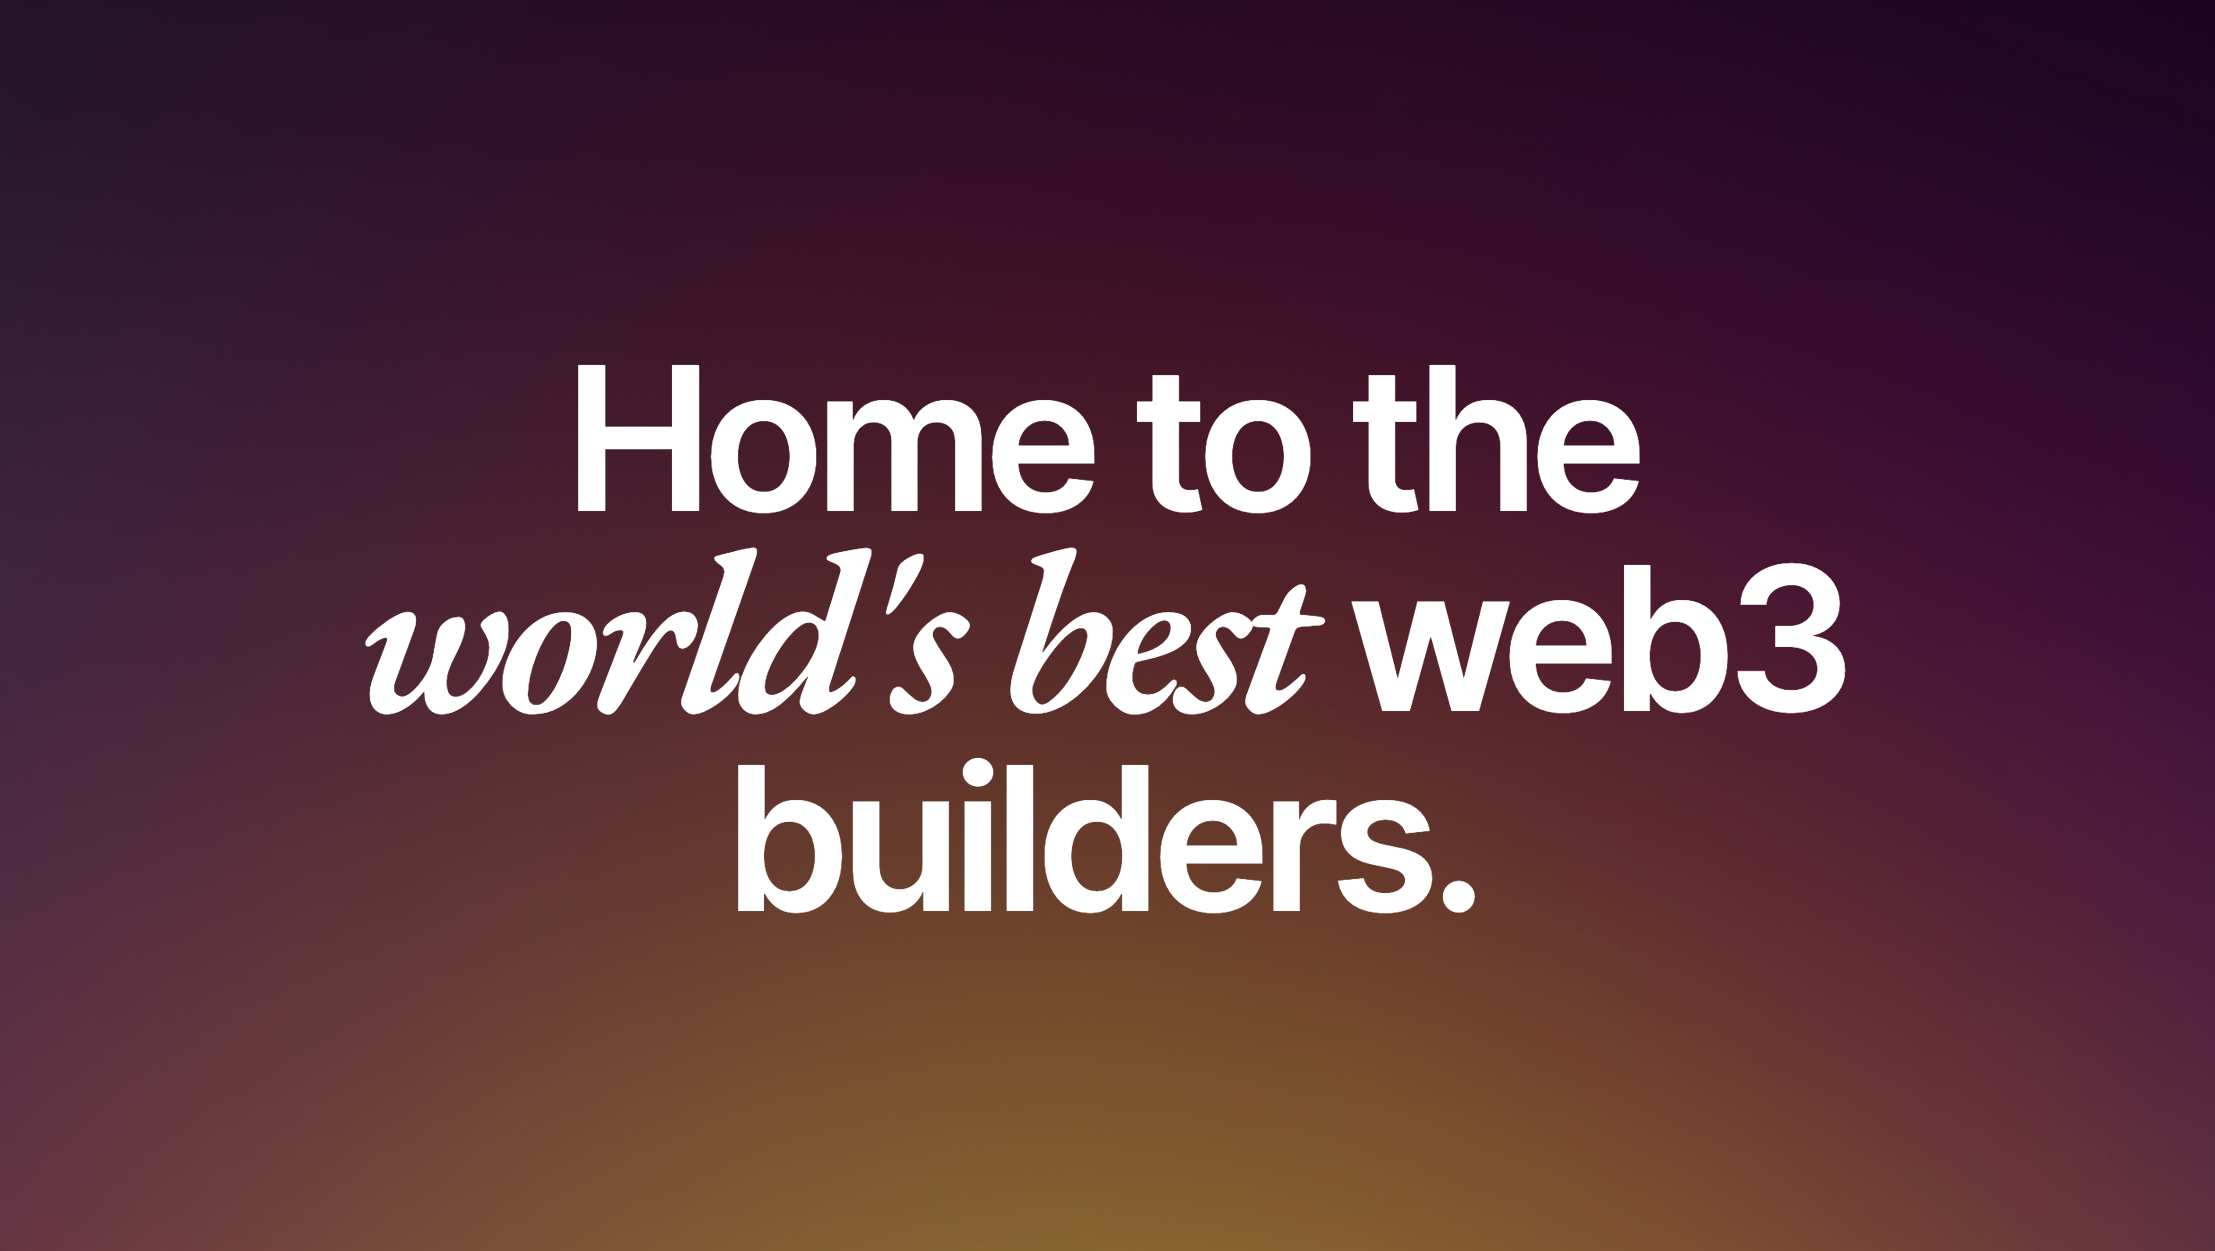 Buildspace accelerates your builder journey into web3